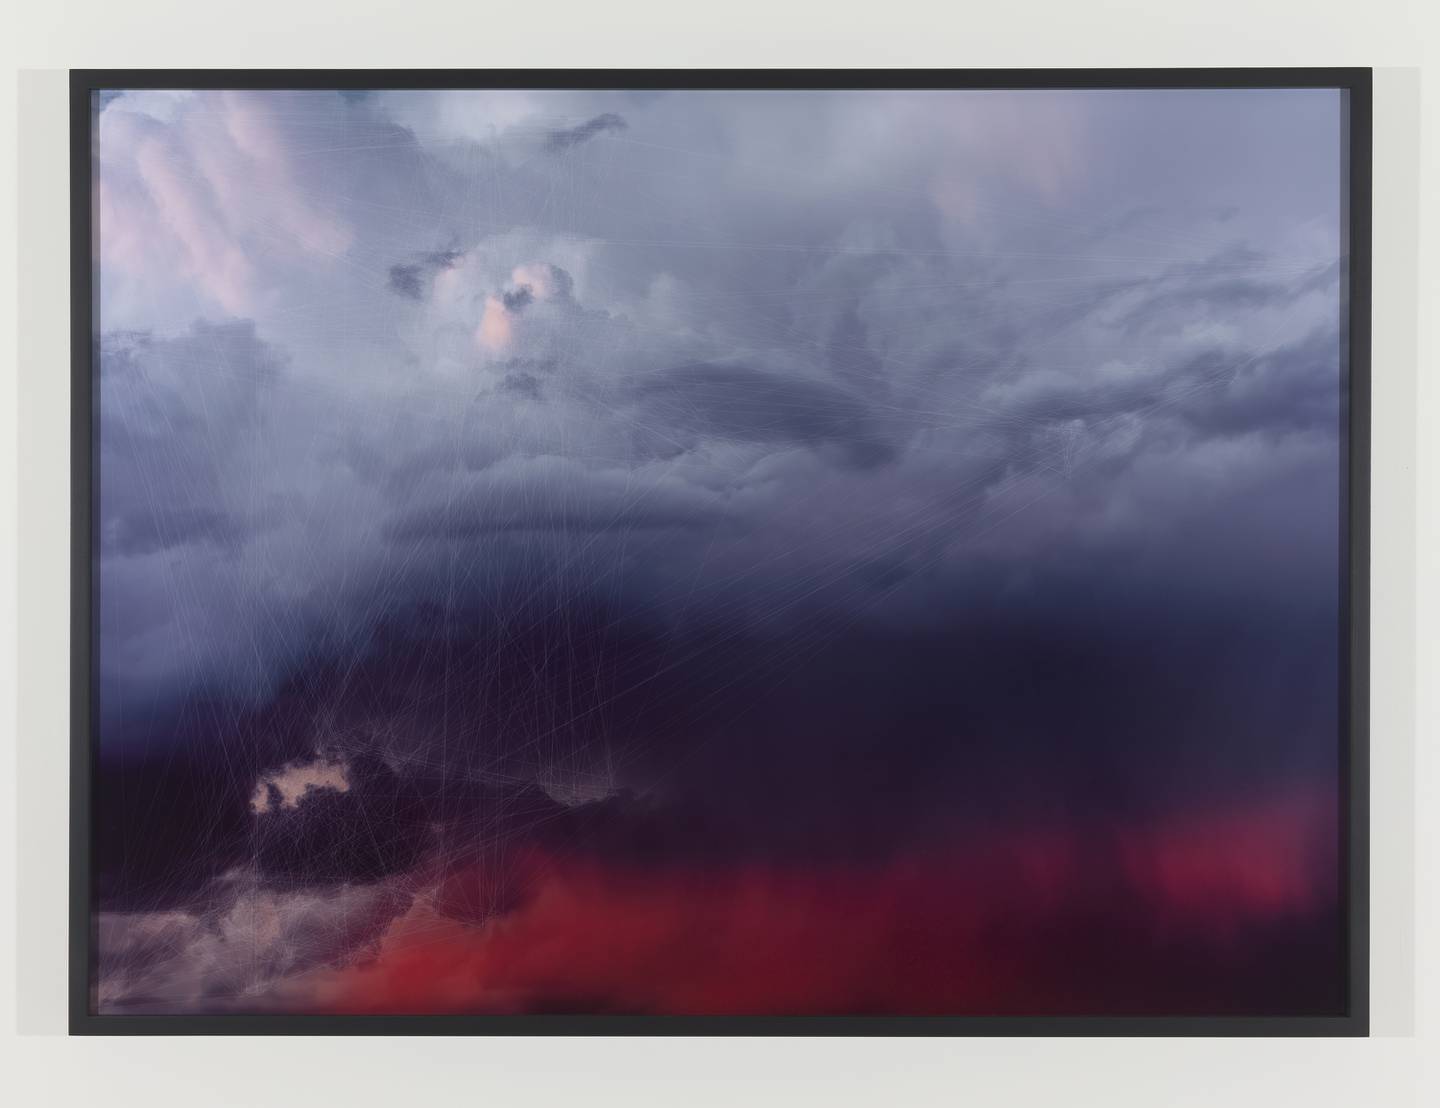 'Cloud #135', Hough Lines by Trevor Paglen (2019). Photo: Trevor Paglen /  Pace Gallery